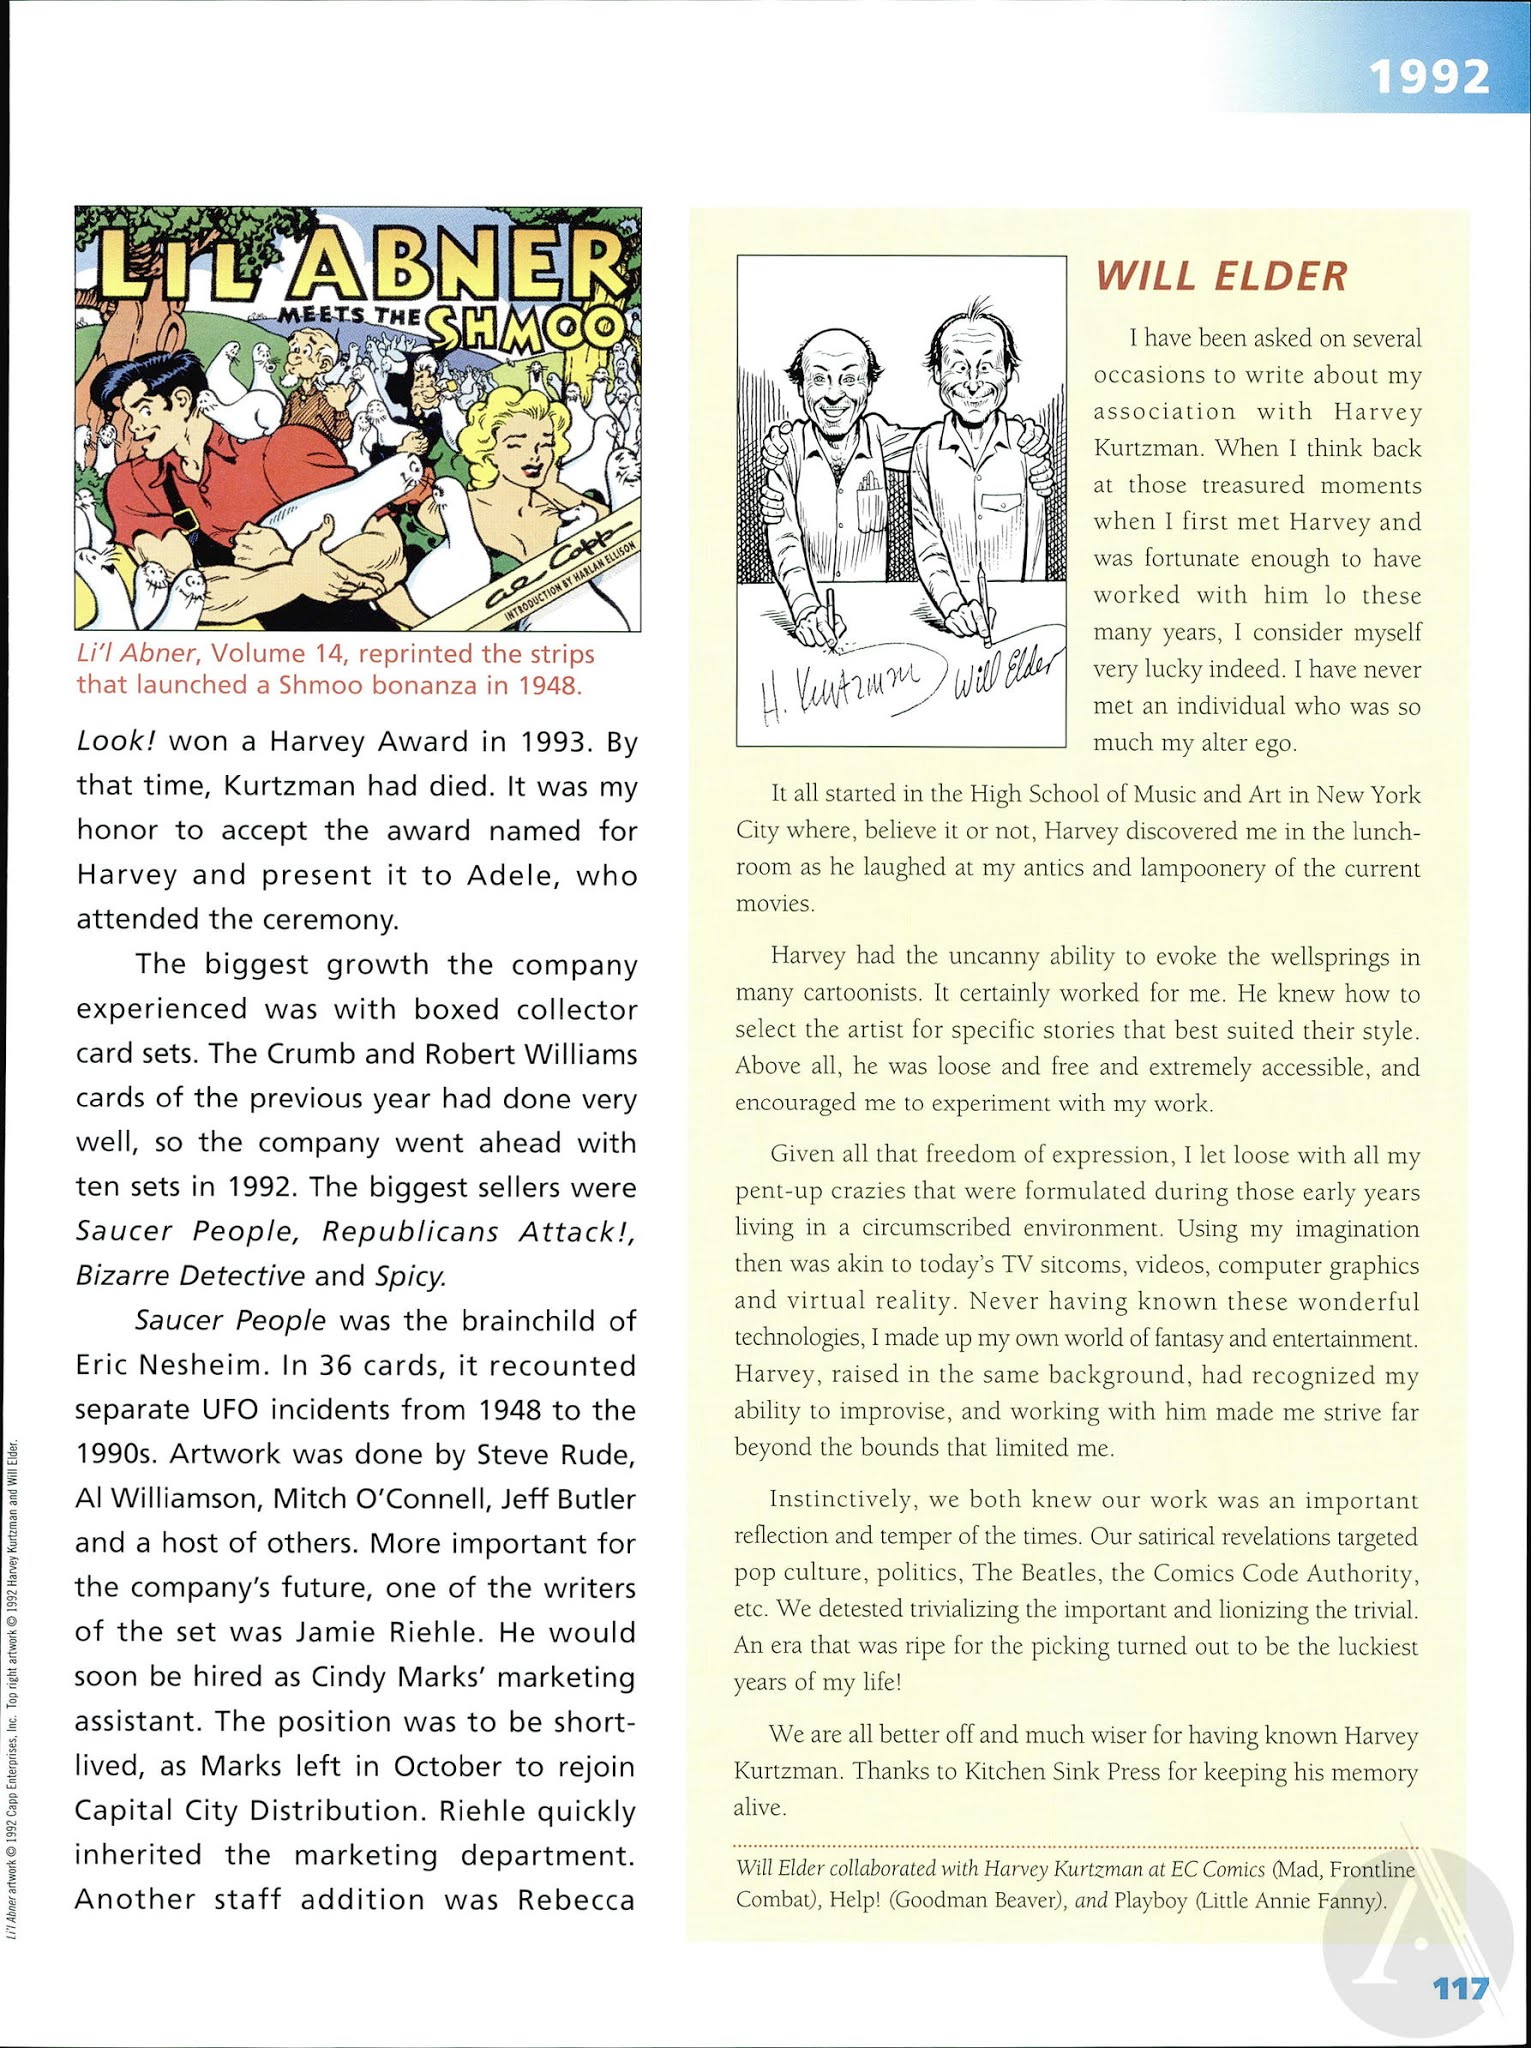 Read online Kitchen Sink Press: The First 25 Years comic -  Issue # TPB - 119